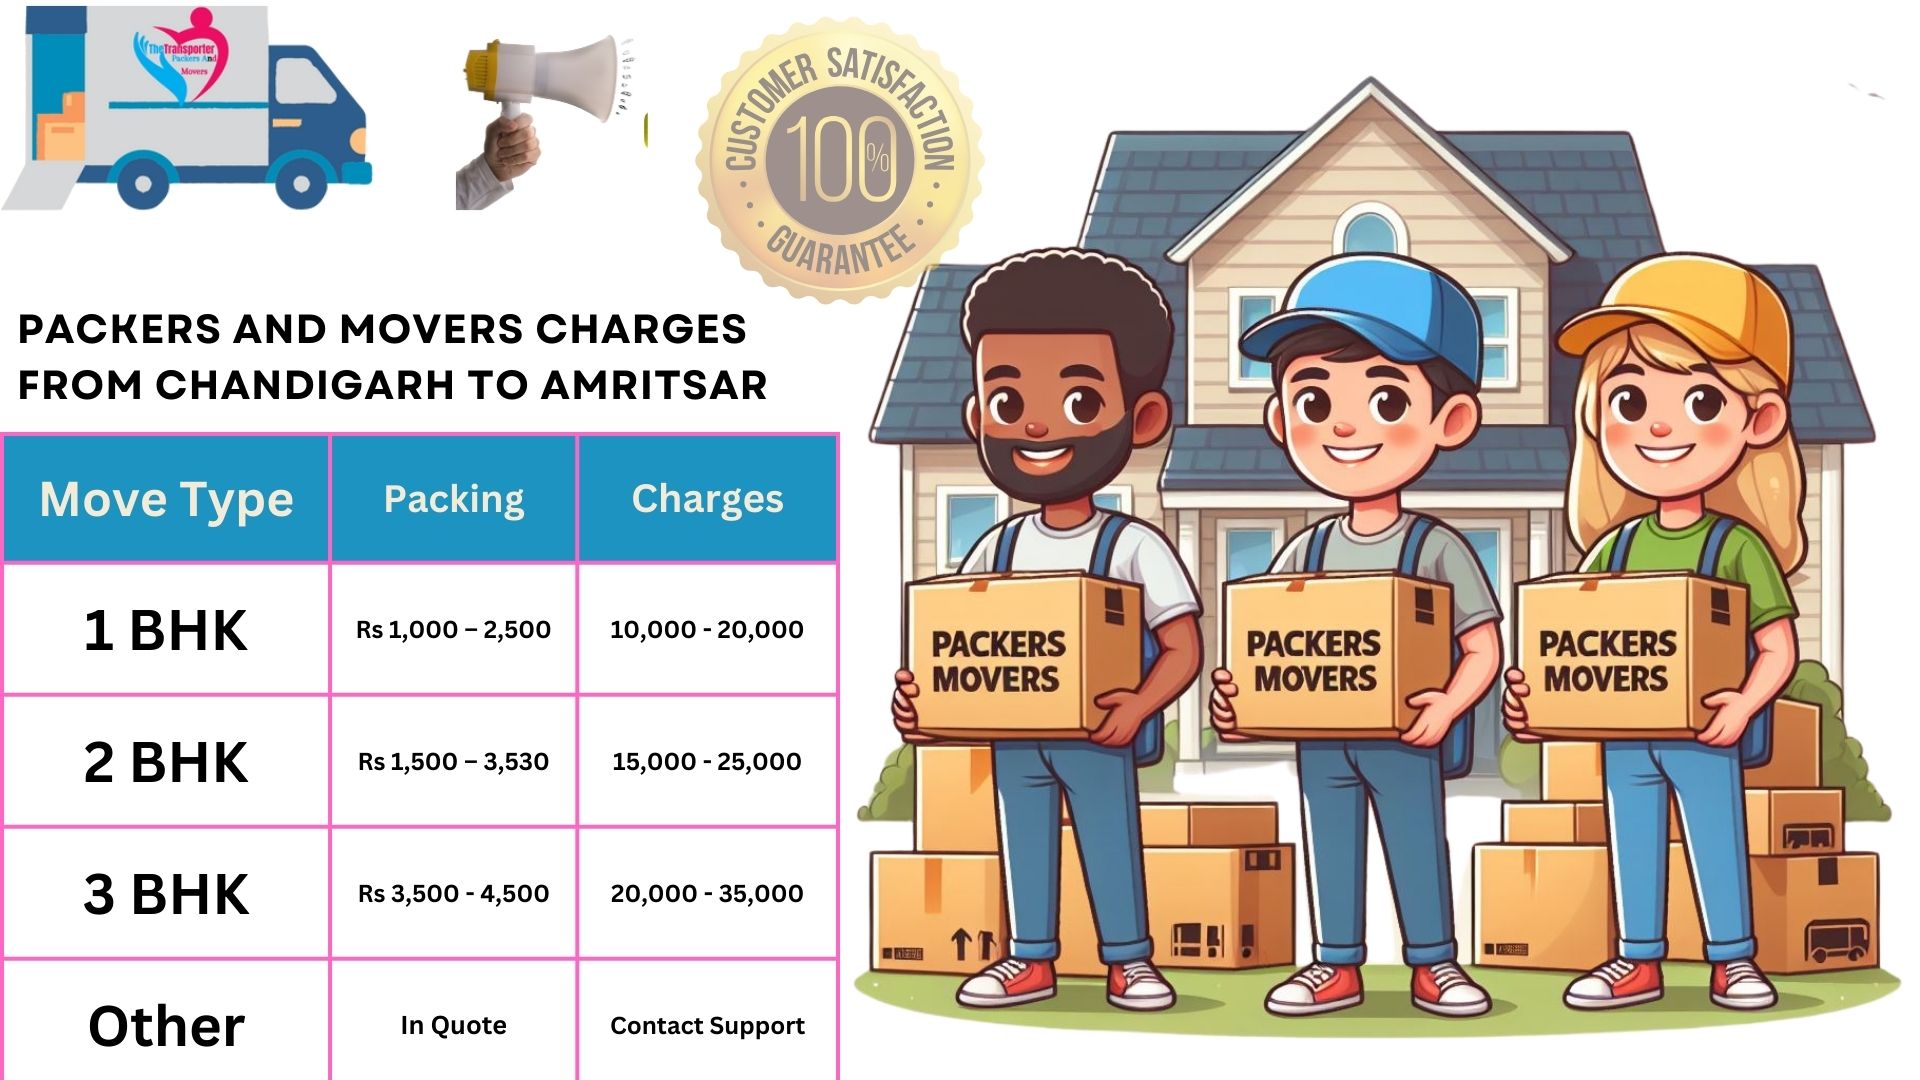 Packers and Movers rates list From Chandigarh to Amritsar